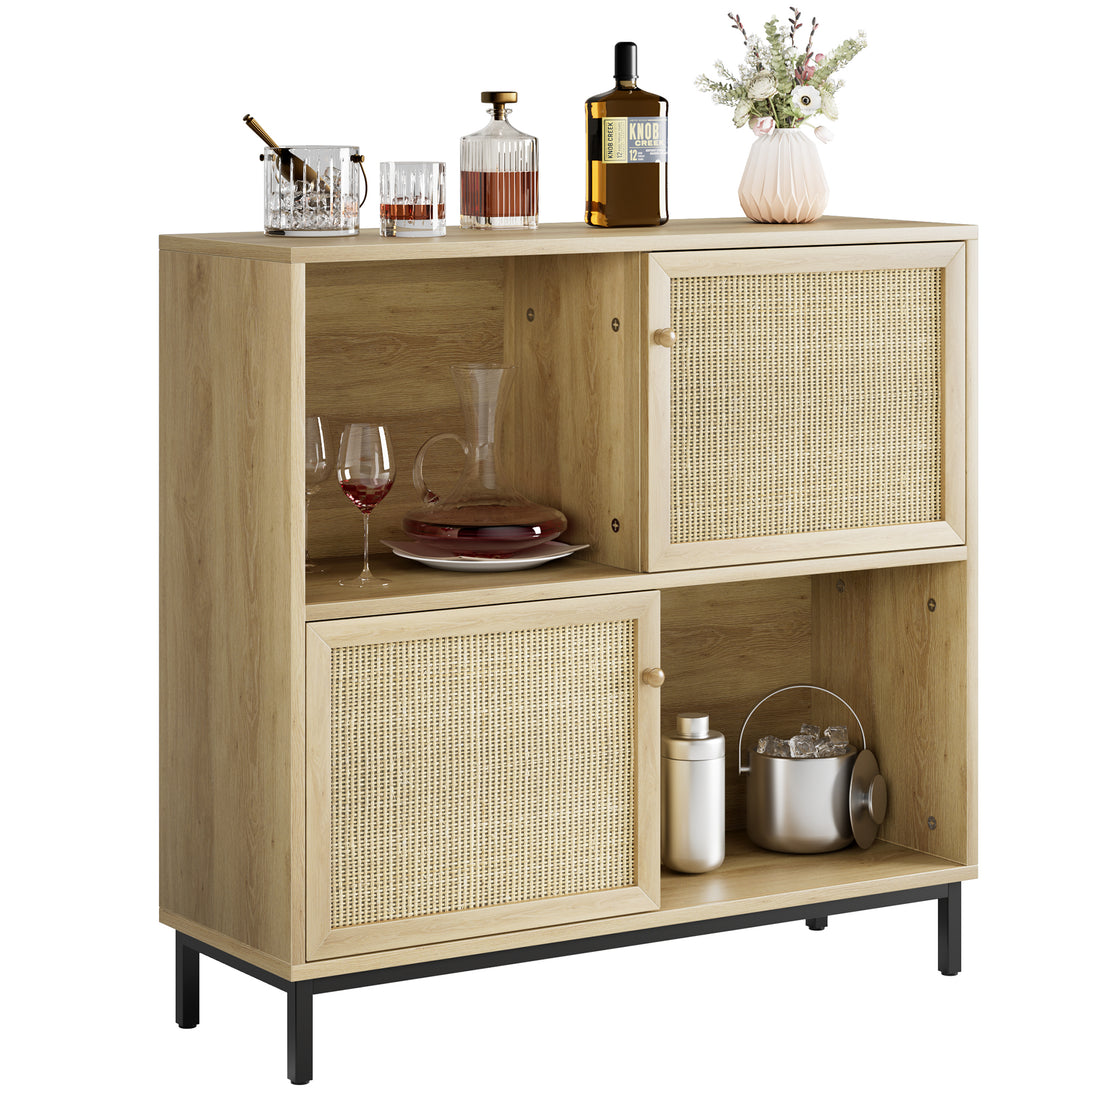 Coffee Bar Cabinet, Rattan Buffet Cabinet with Storage, Wood Sideboard Cabinet with Sliding Door, Accent Cabinet for Kitchen, Dining Room, Living Room, Entryway